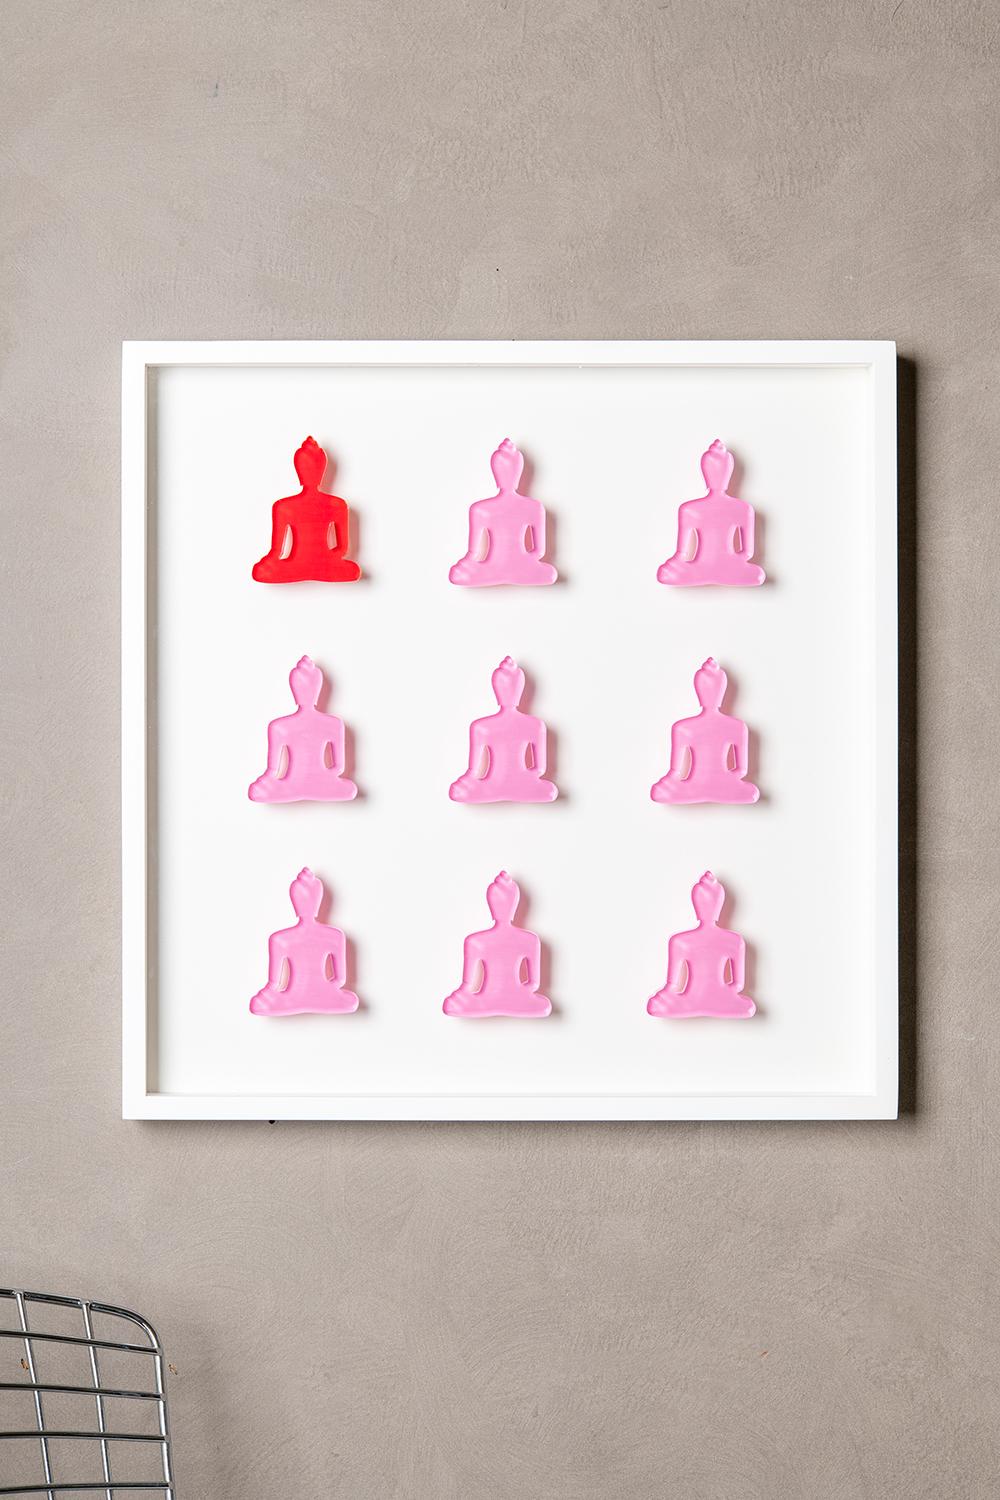 Nine No. 10 - pink red buddha wall sculpture - Contemporary Sculpture by Tal Nehoray